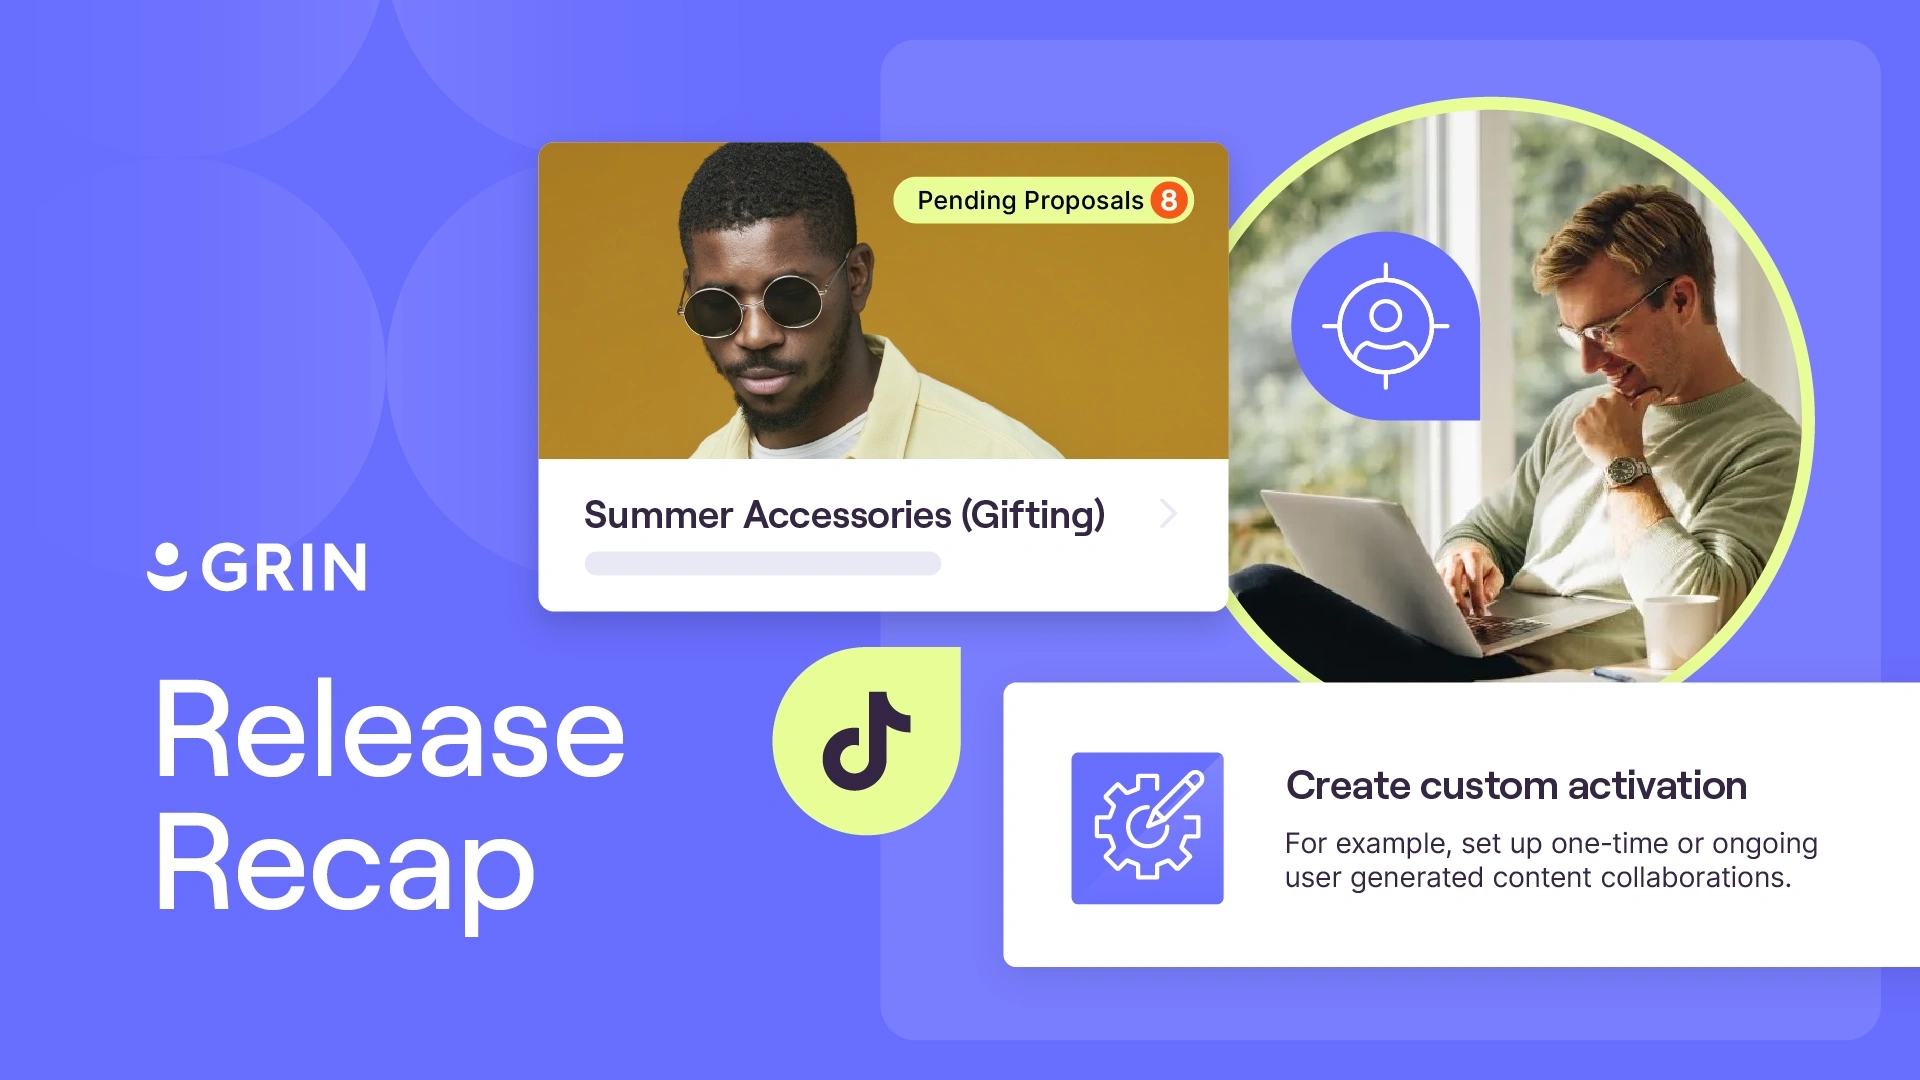 News featured image Release Recap for GRIN featuring influencer gifting and custom activation